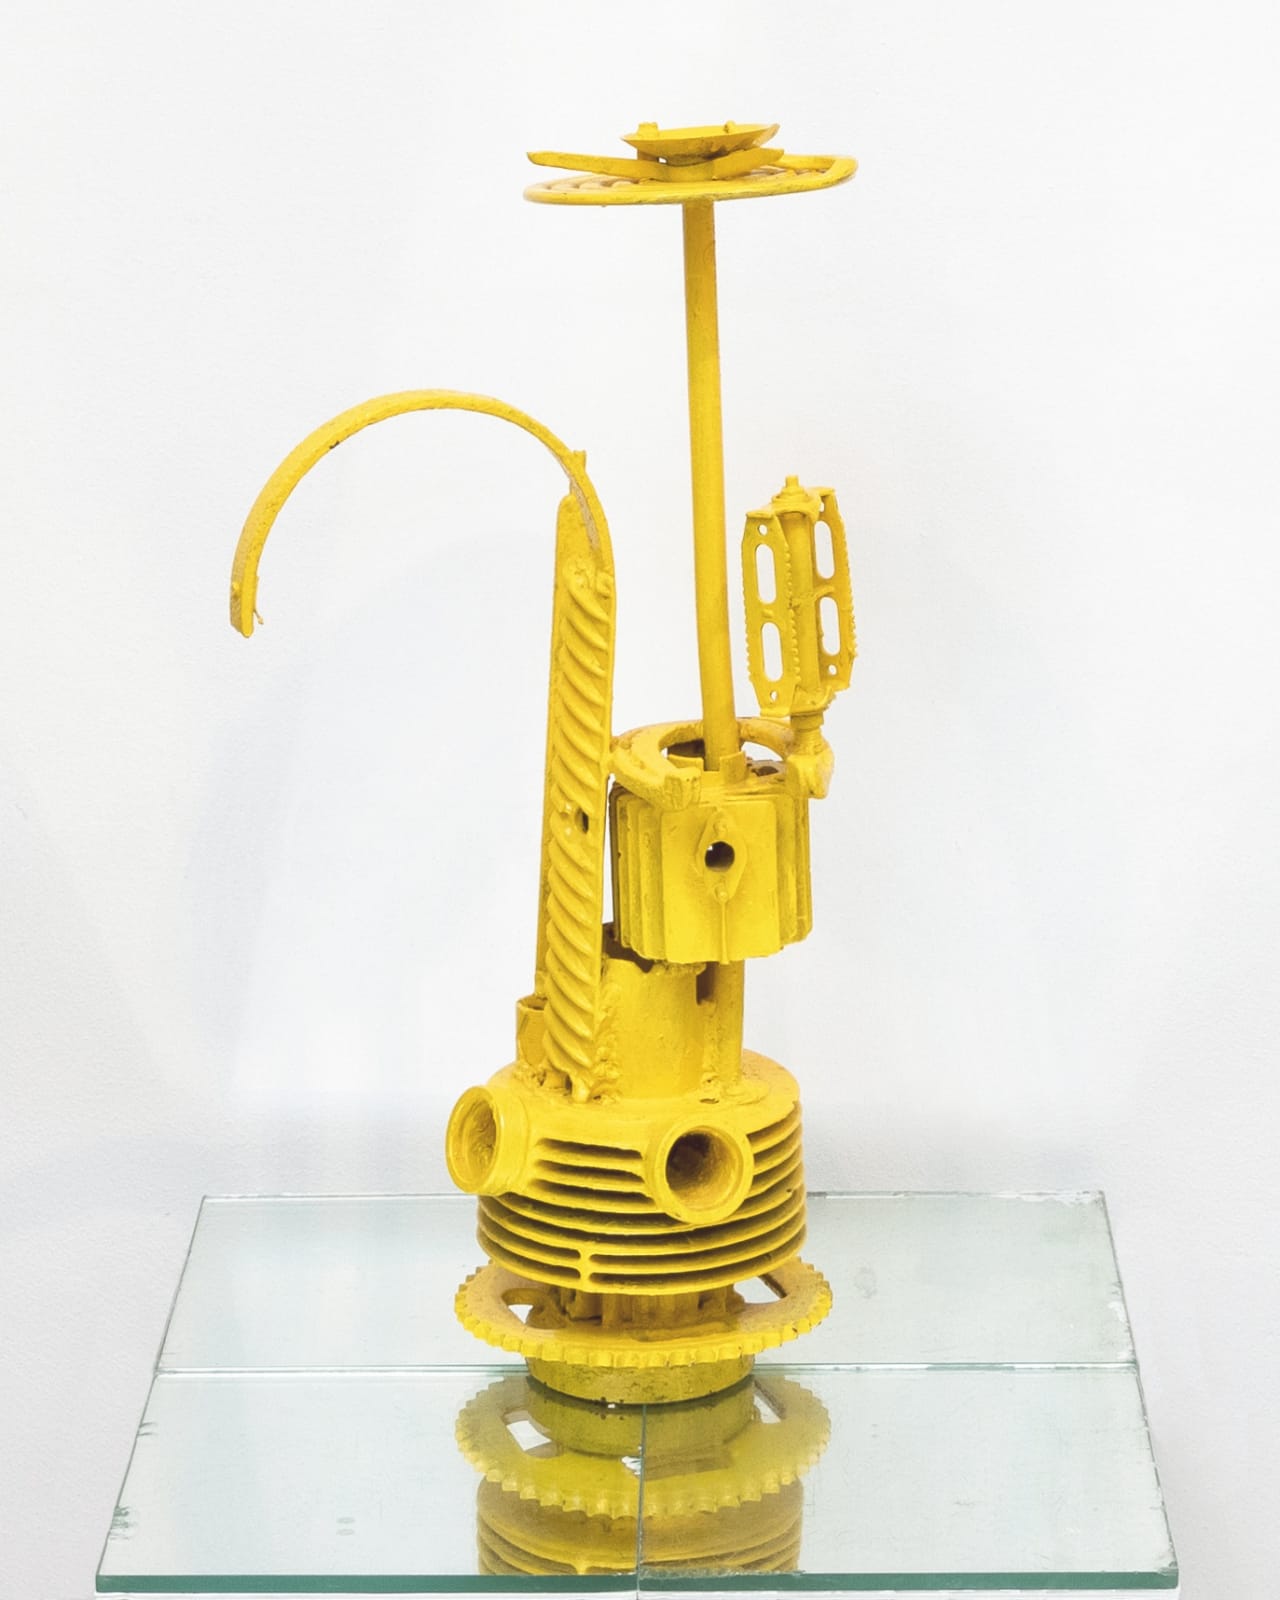 STANO FILKO, Model of Observation Tower (Yellow), 1966 - 1967